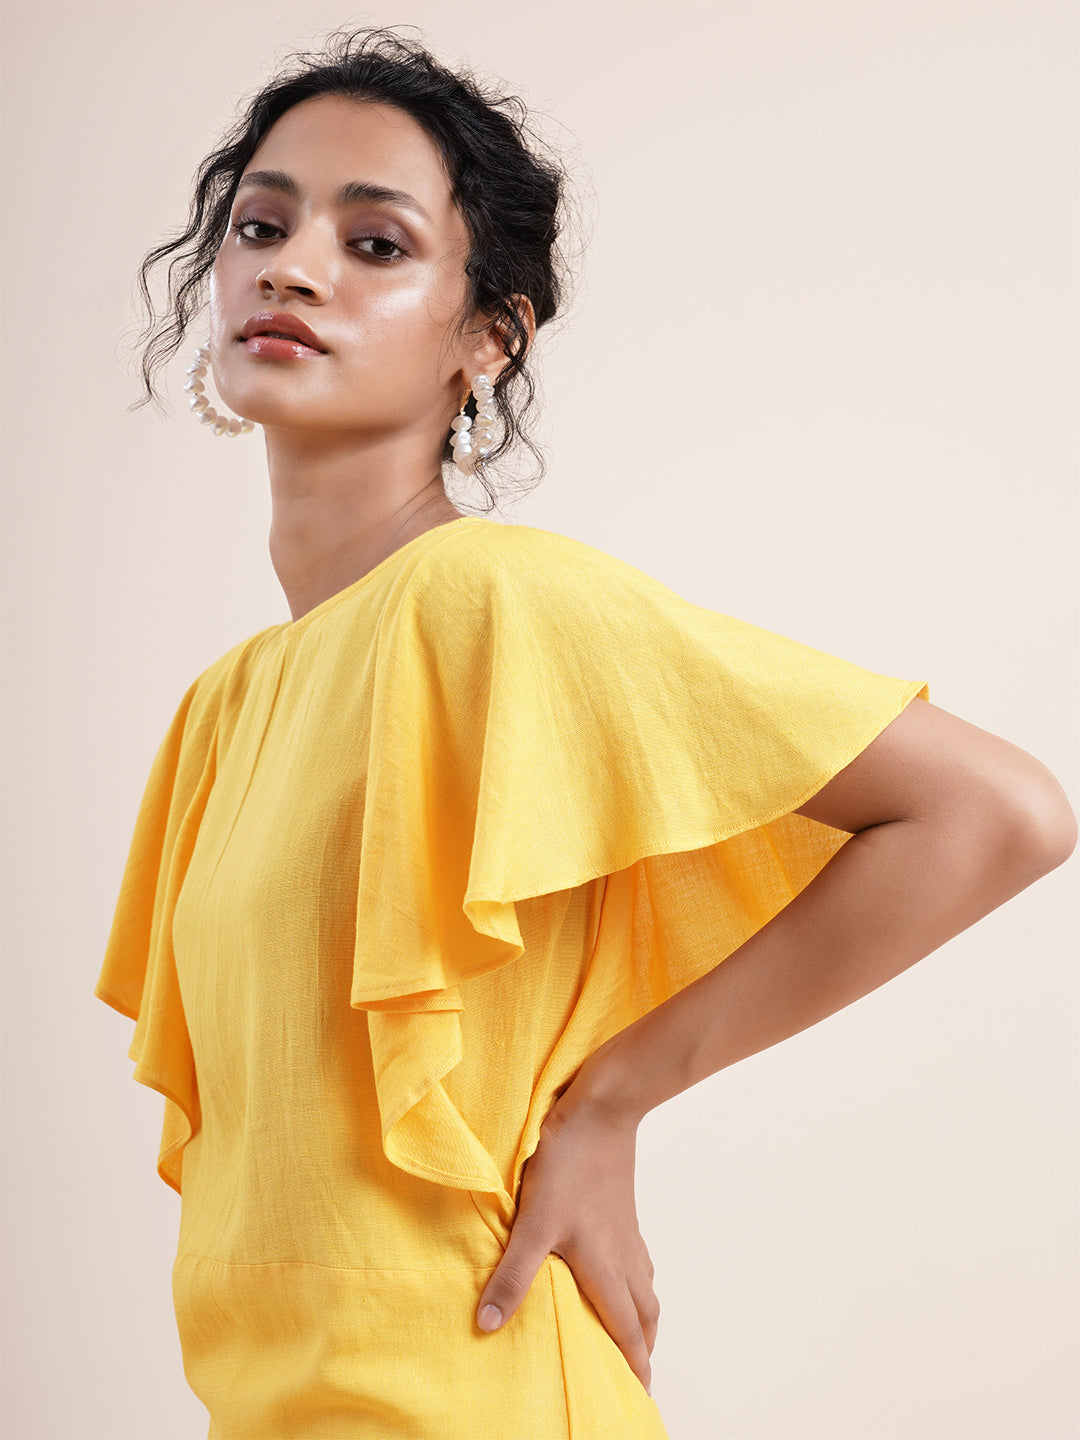 Yellow Butterfly sleeved kurta in rayon flax